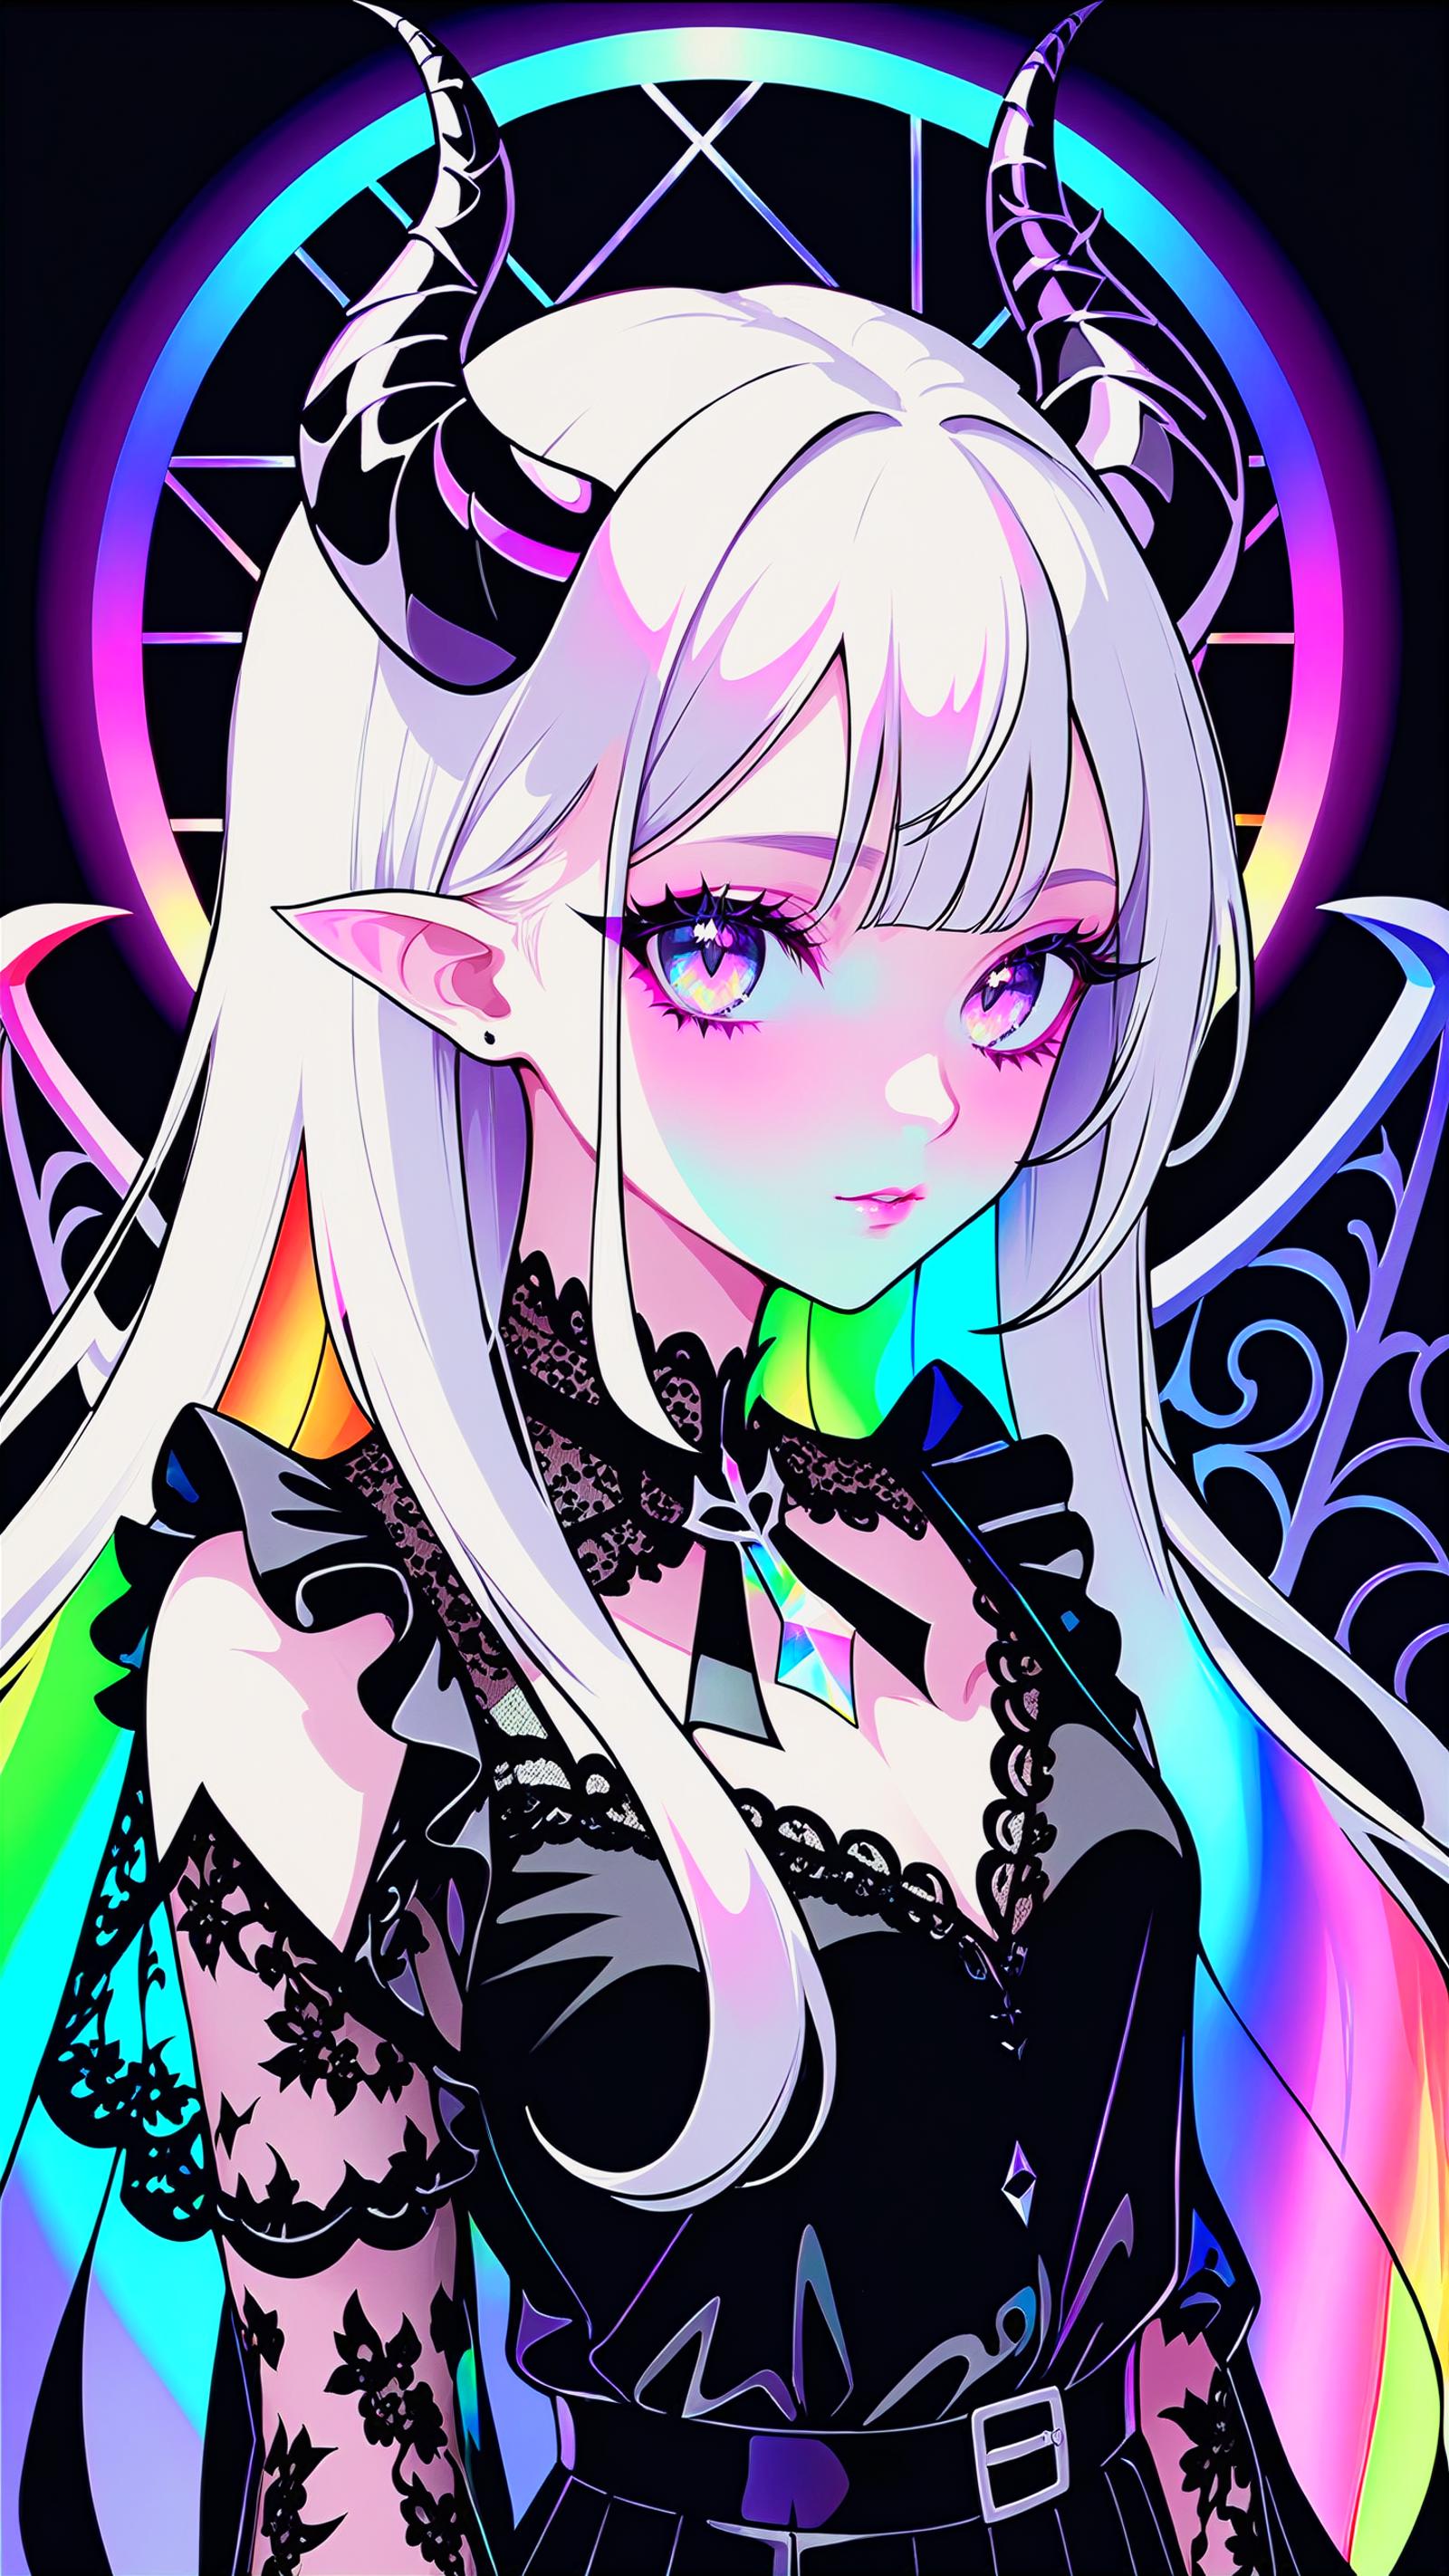 Anime Character with Pointed Ears, Black Lace, and Rainbow Hair.